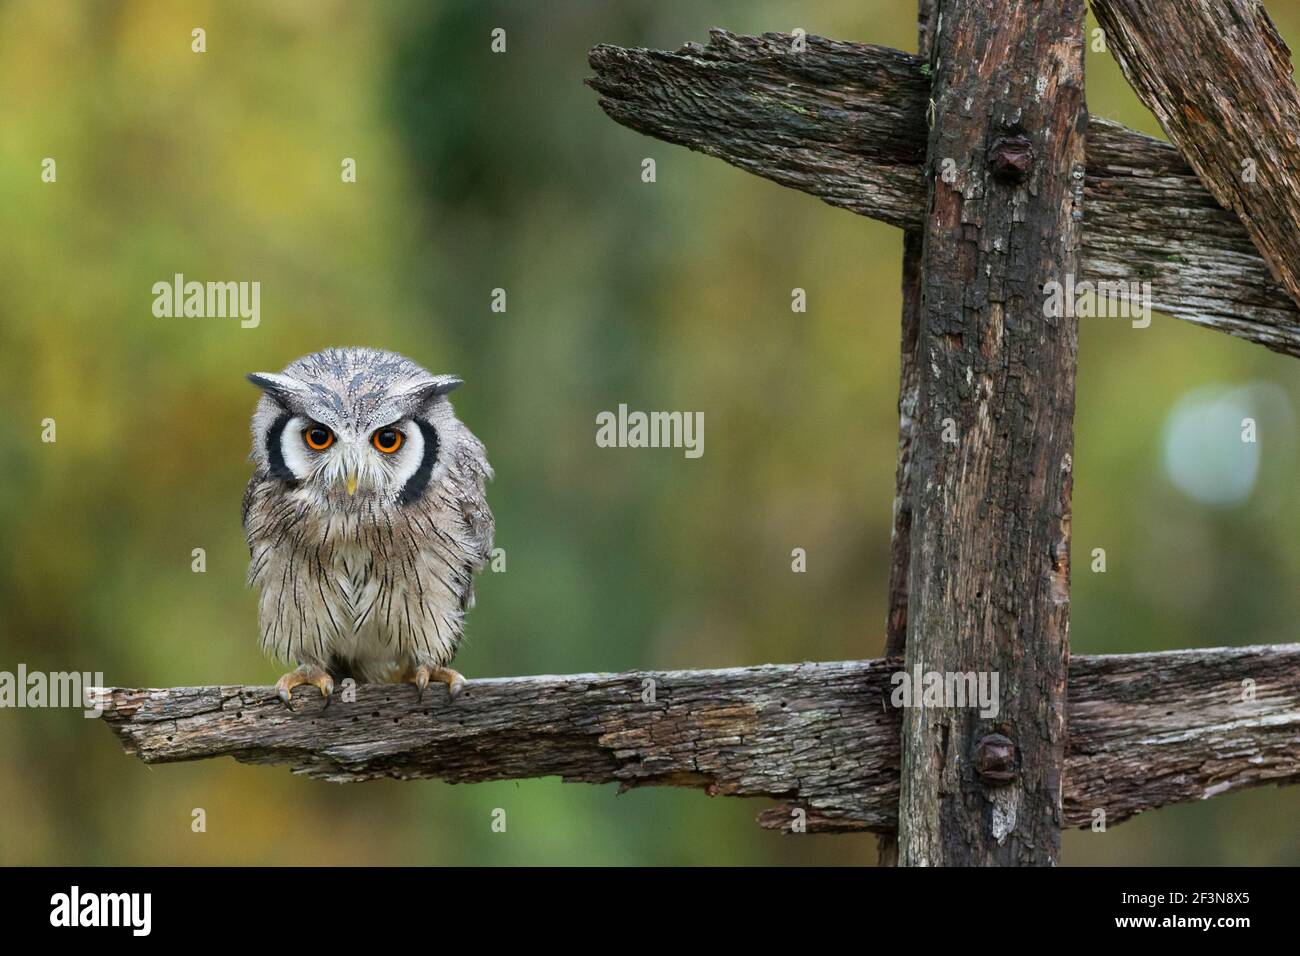 Northern white-faced owl Ptilopsis leucotis (captive), adult male perched on wooden fence, Hawk Conservancy Trust, Andover, Hampshire, UK, November Stock Photo